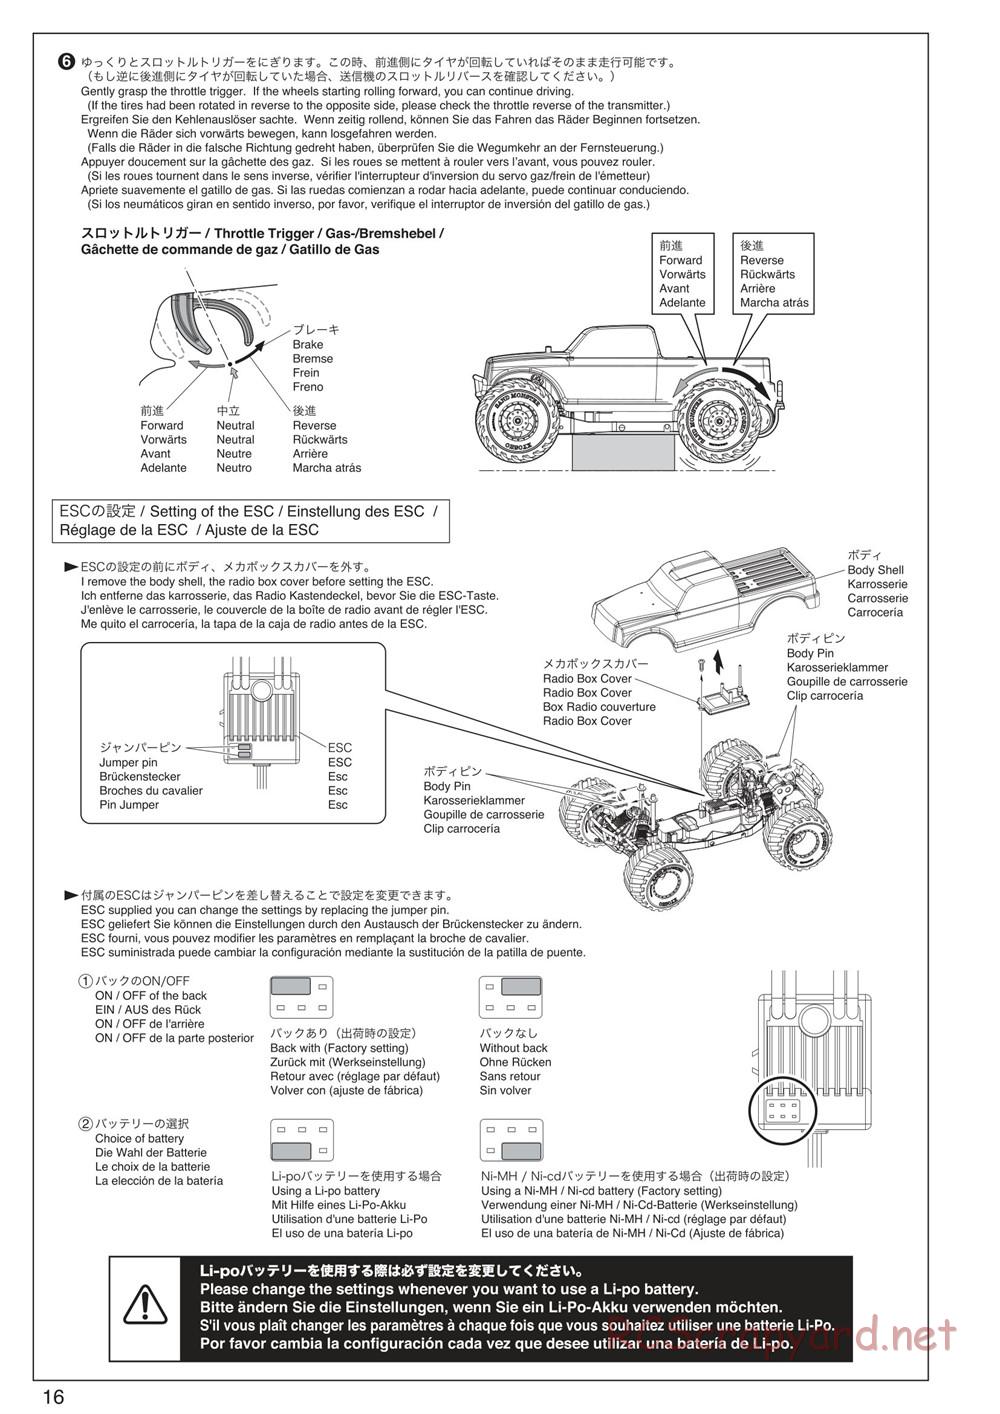 Kyosho - Monster Tracker EP - Manual - Page 16